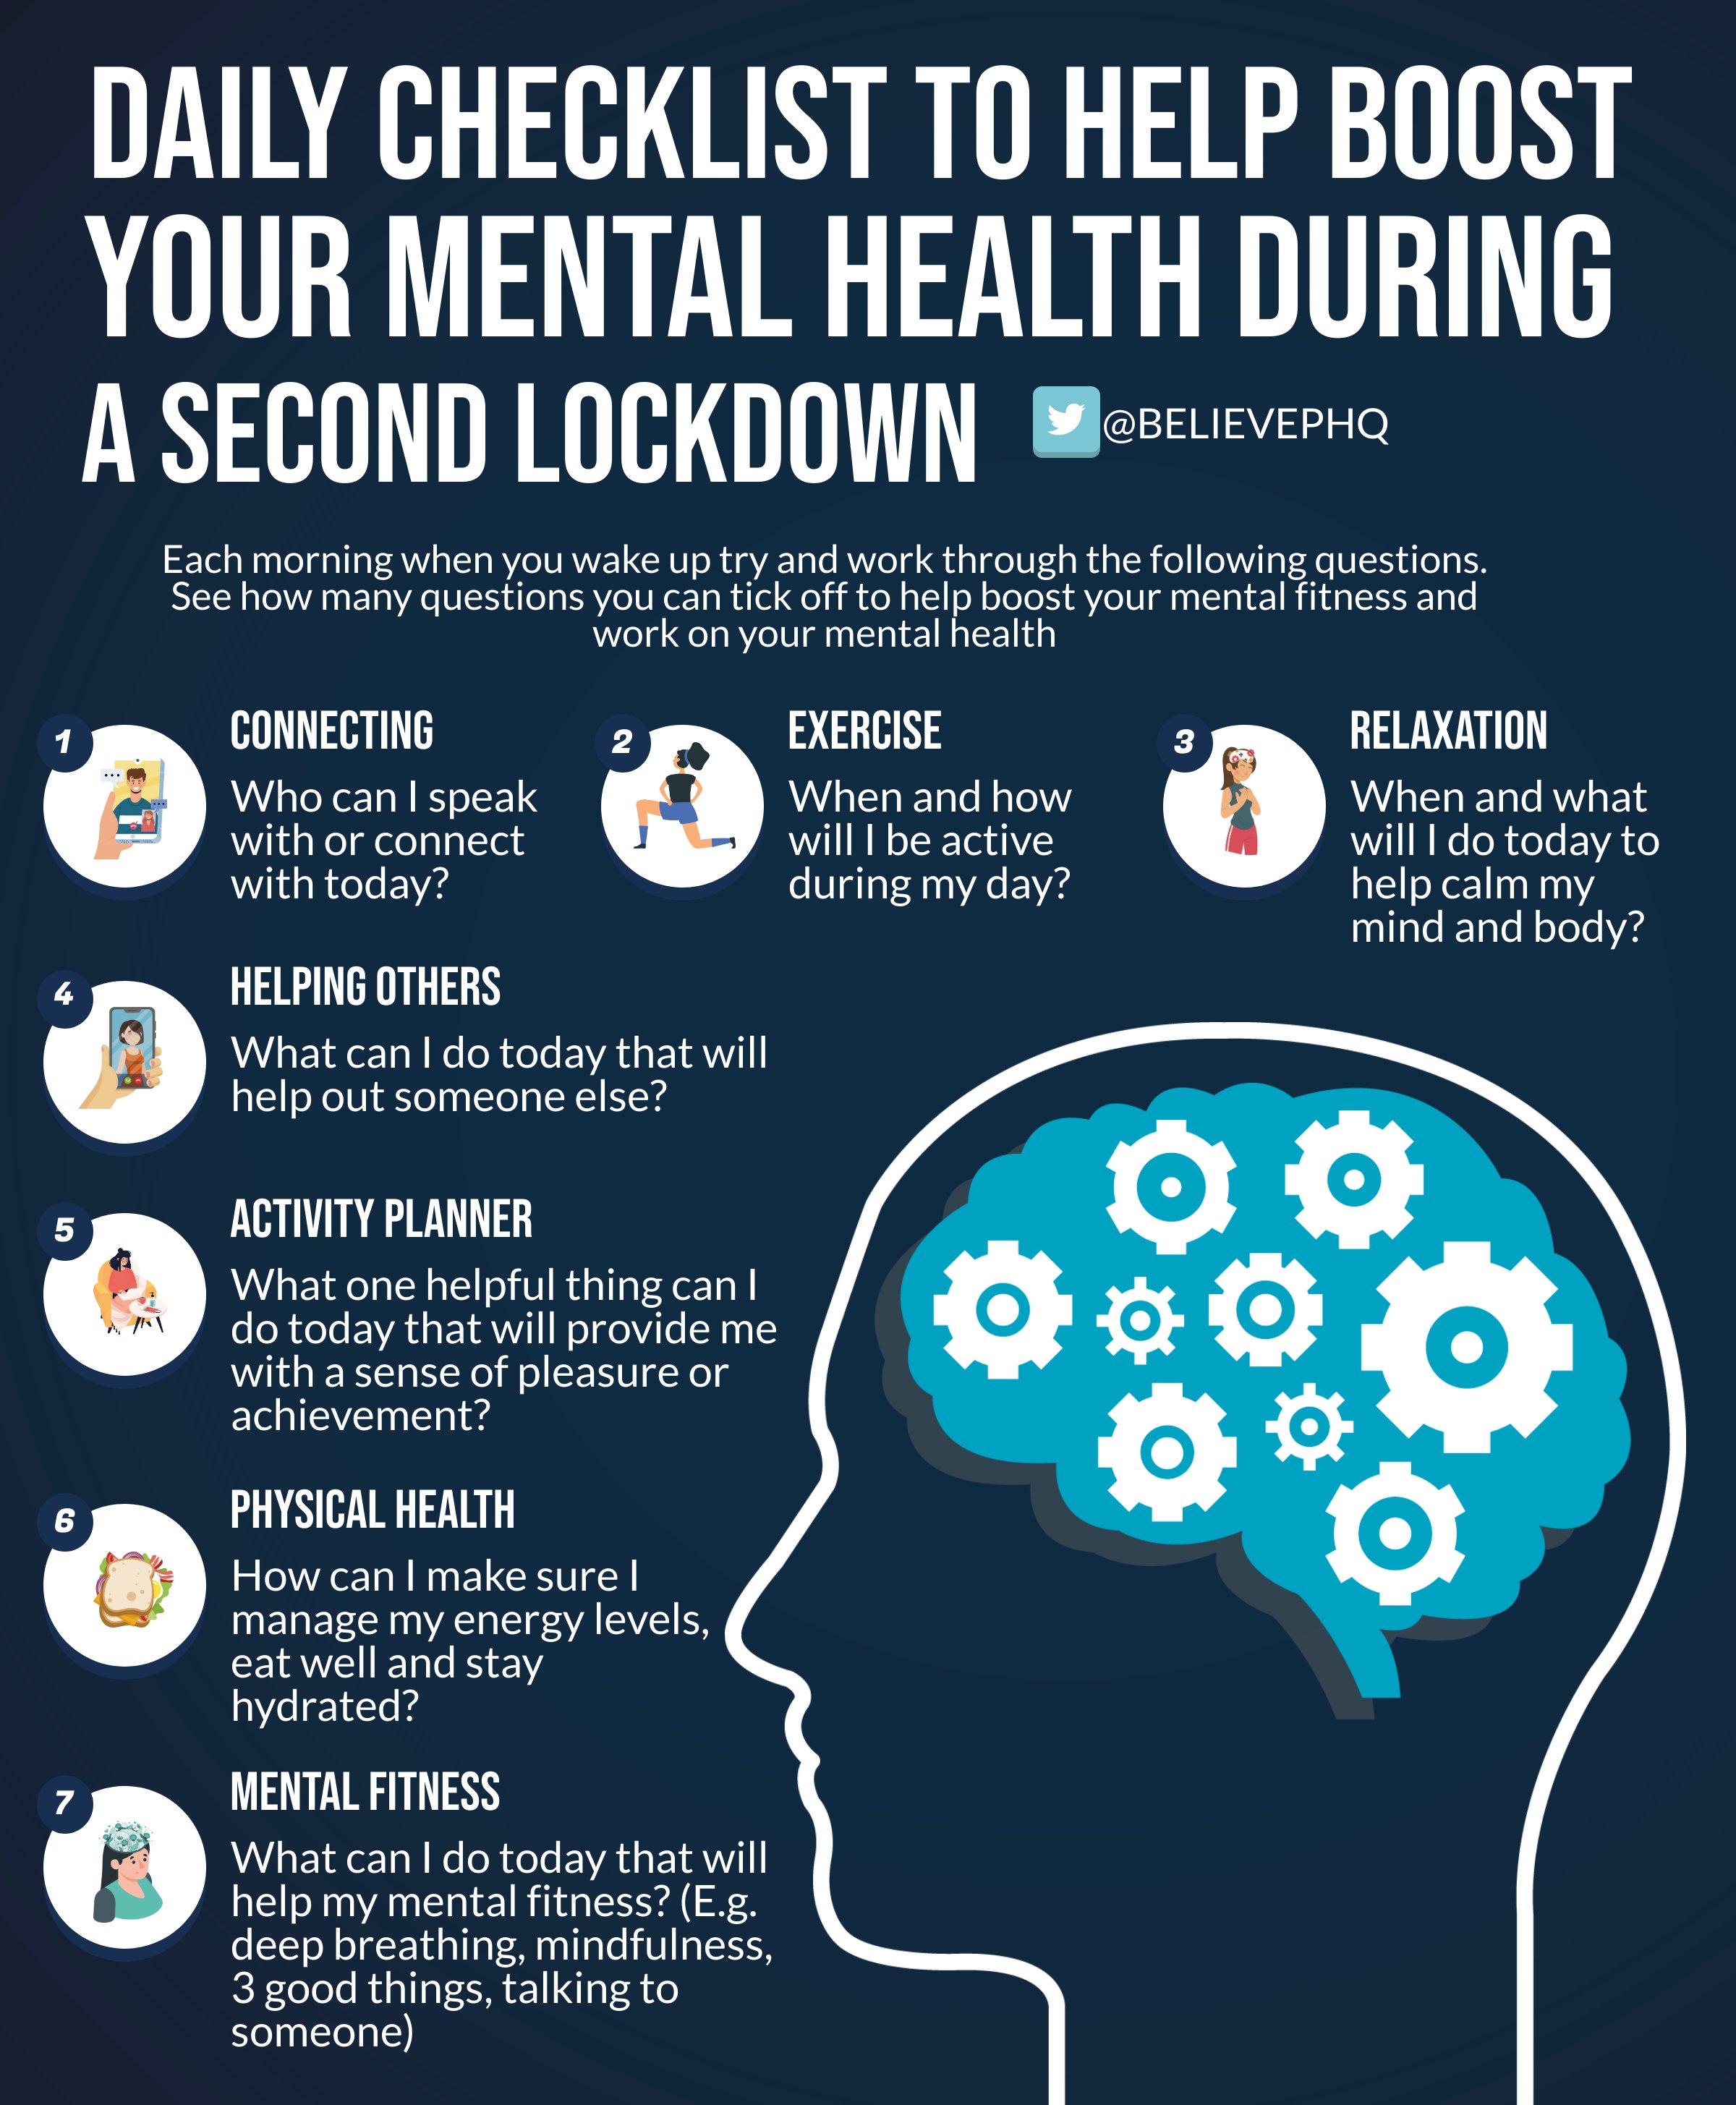 Believeperform Daily Checklist To Help Boost Your Mental Health During A Second Lockdown T Co Jjjtpgbixi Twitter